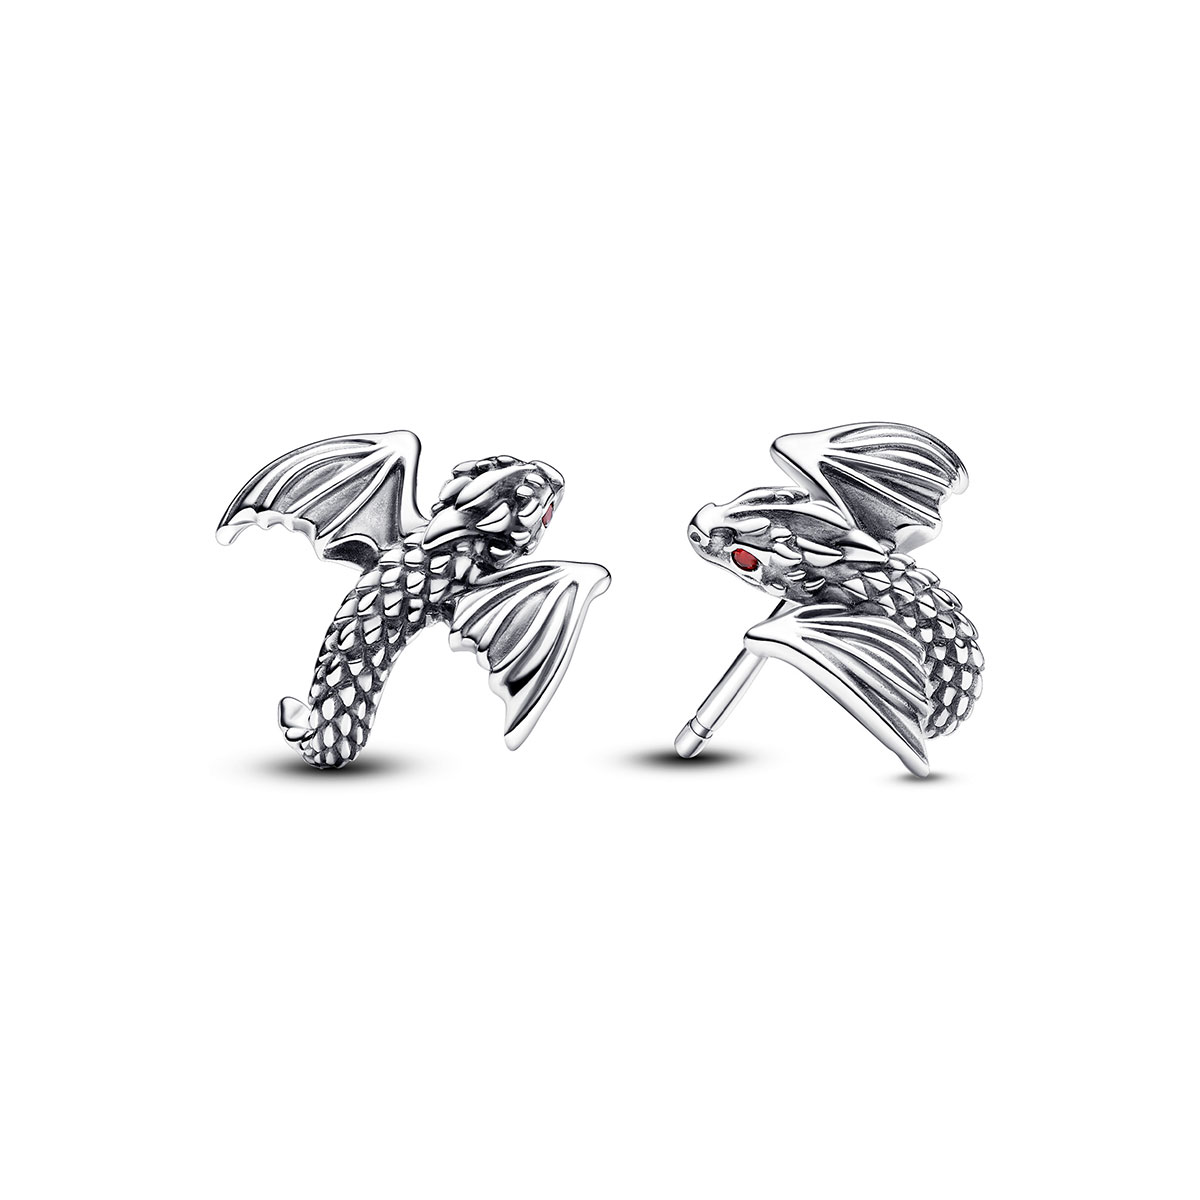 Game of Thrones Curved Dragon Stud Earrings